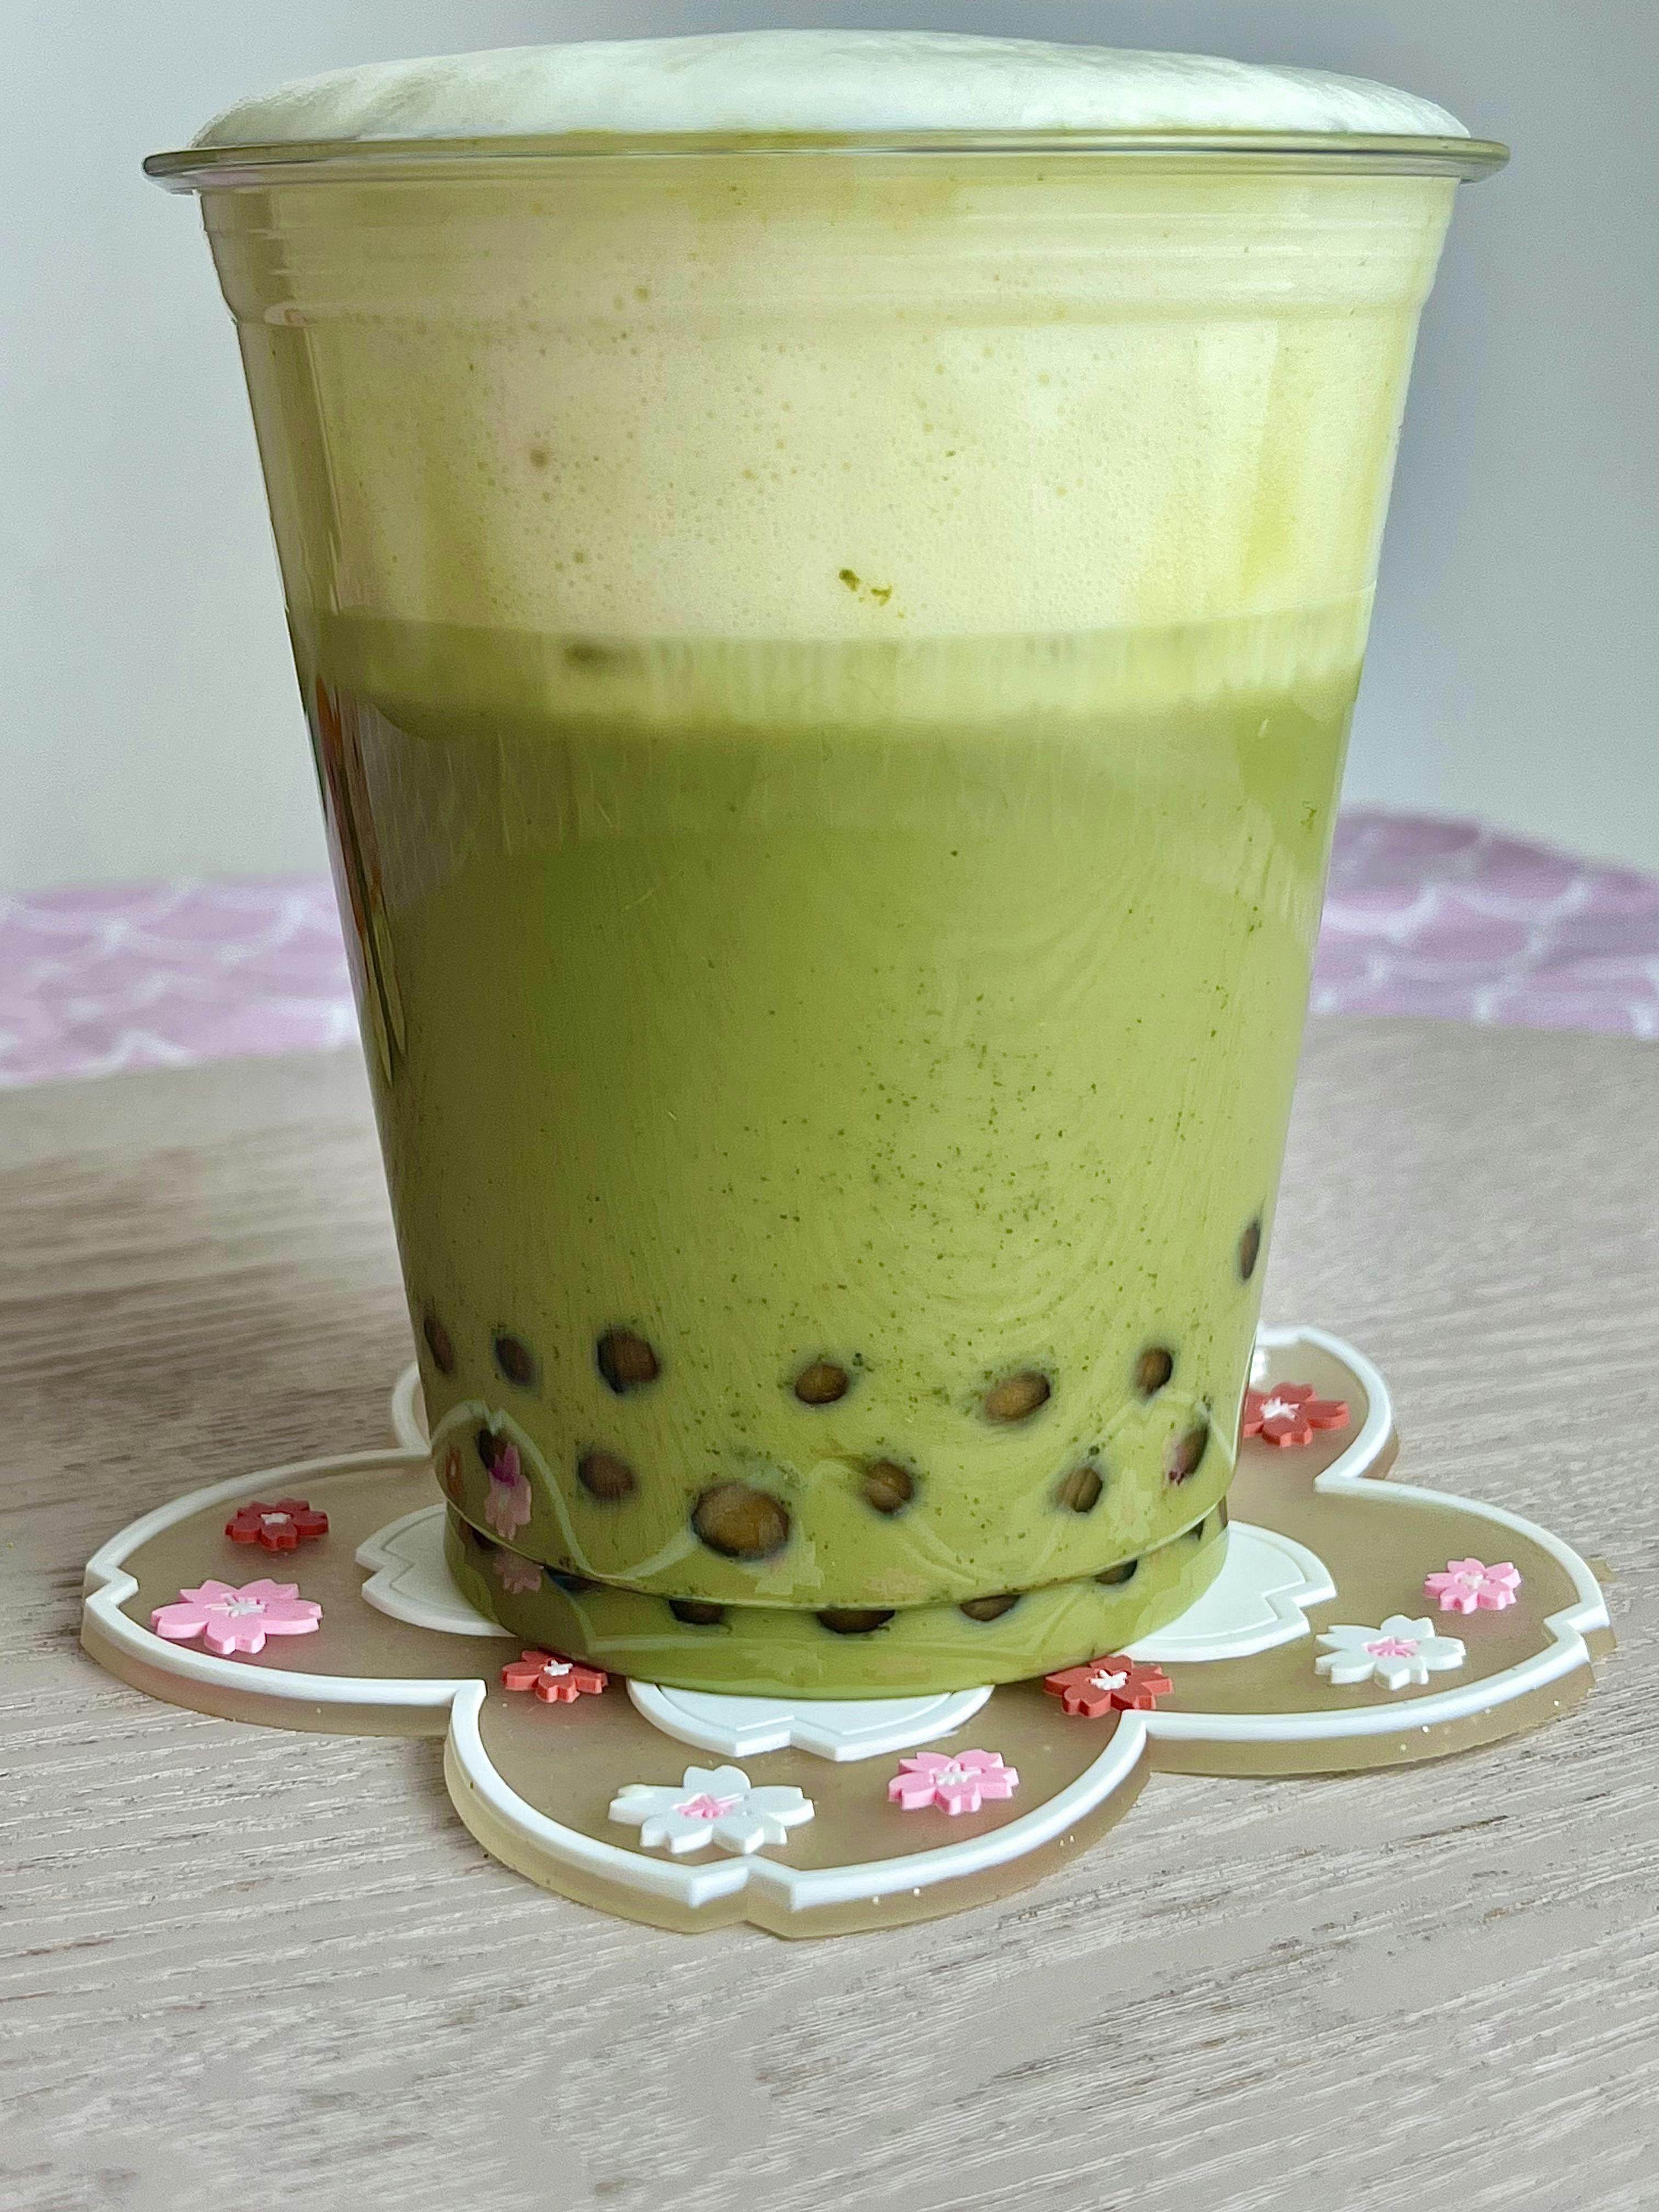 Picture for Iced matcha boba latte 